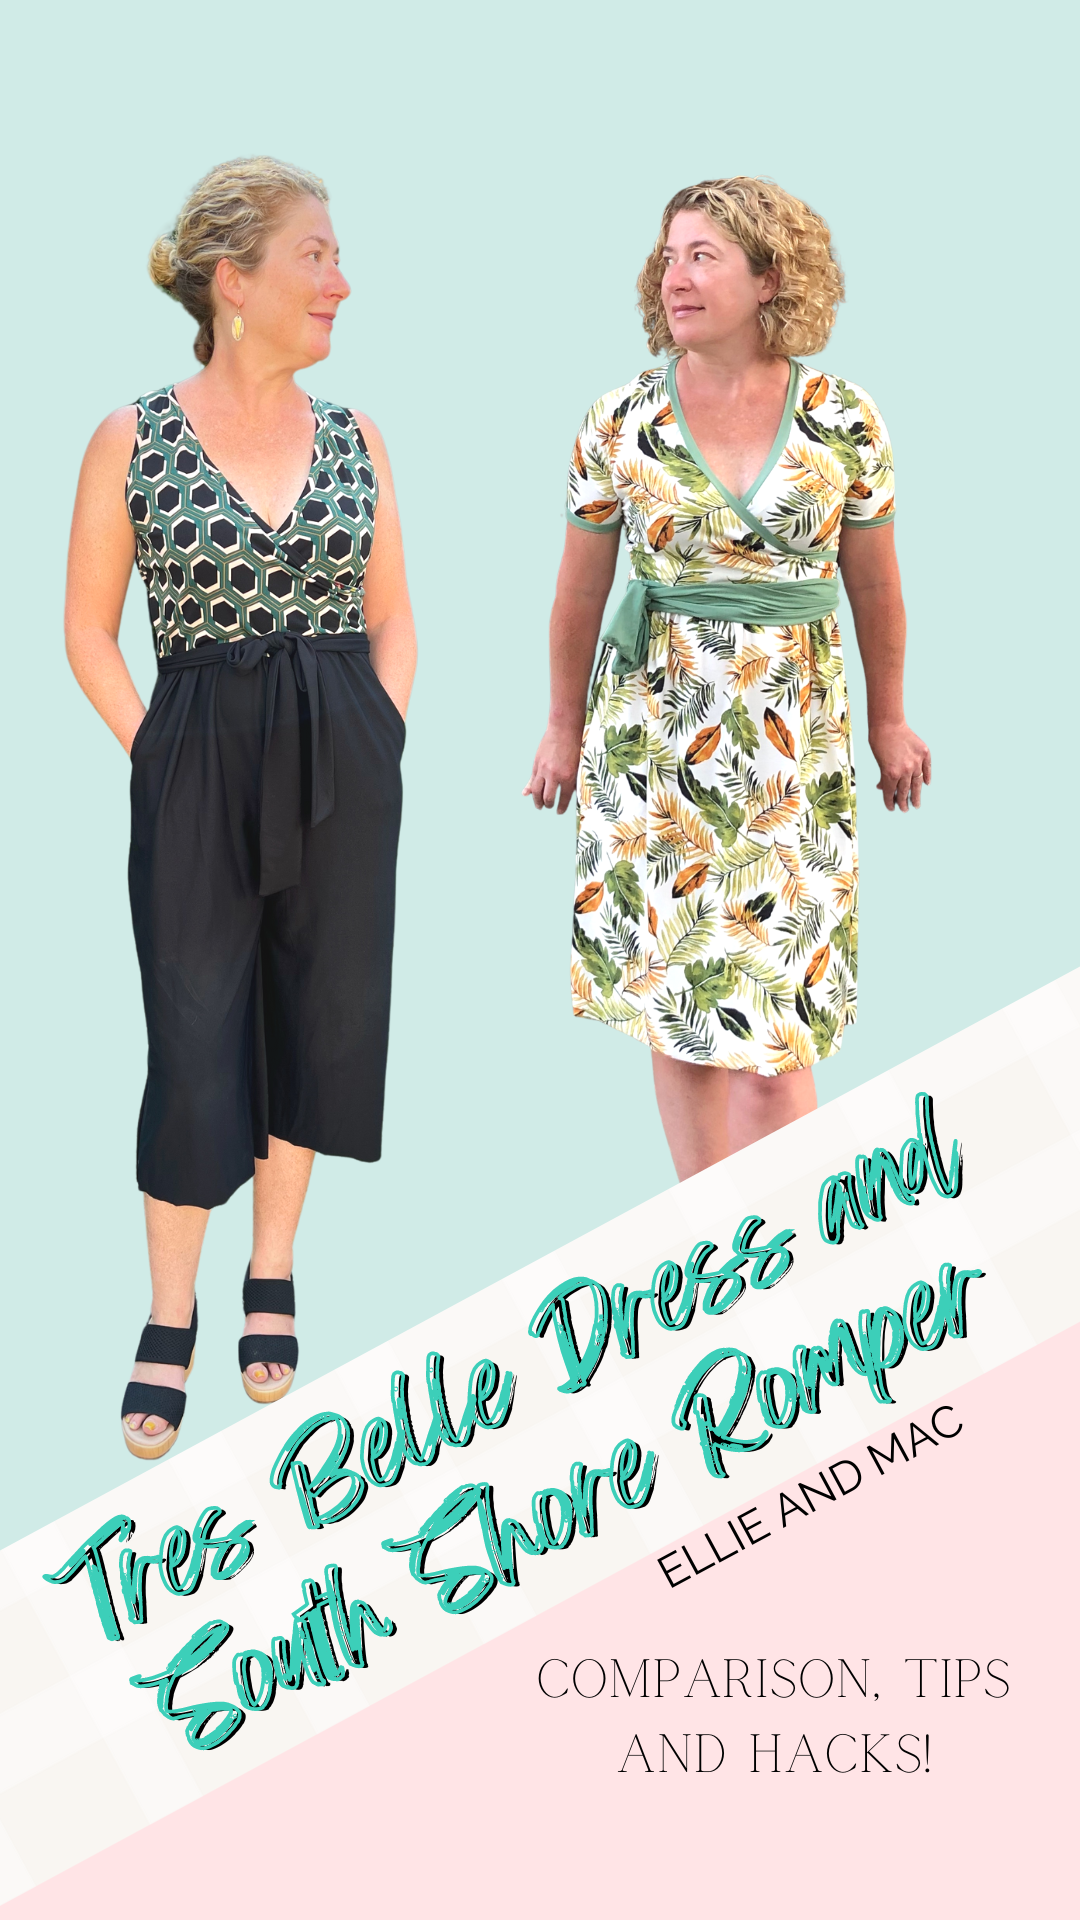 The Tres Belle Dress and South Shore Romper – Comparison, Tips and Hacks!